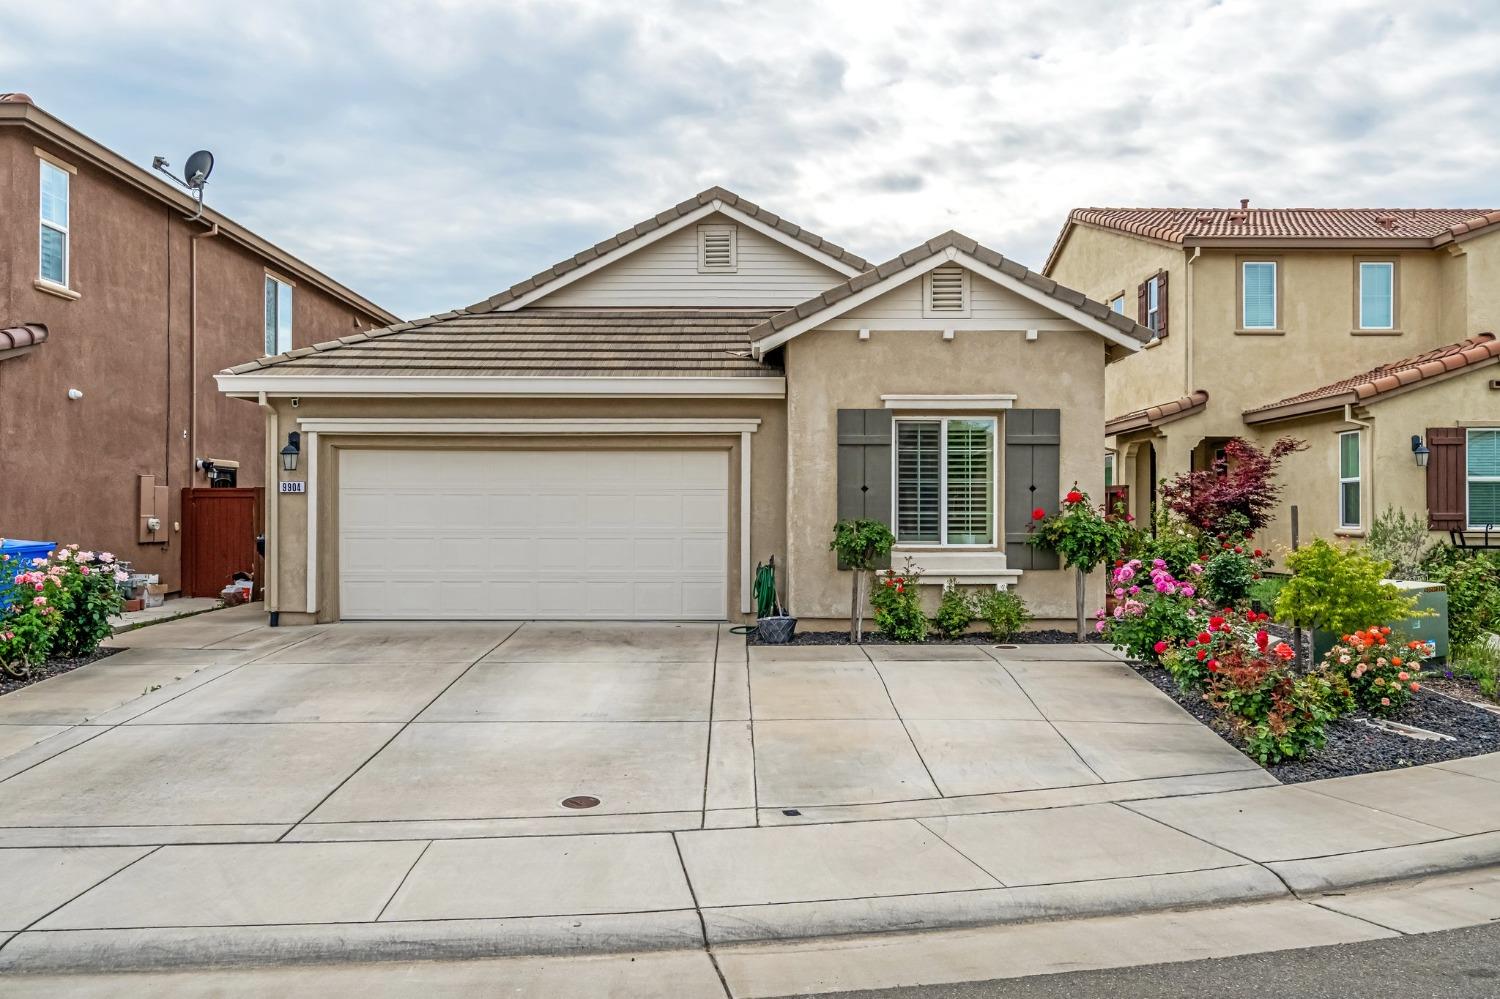 Welcome home to 9904 Storm Petrel Ct located in the sought after 95757 area in Elk Grove. The beauti